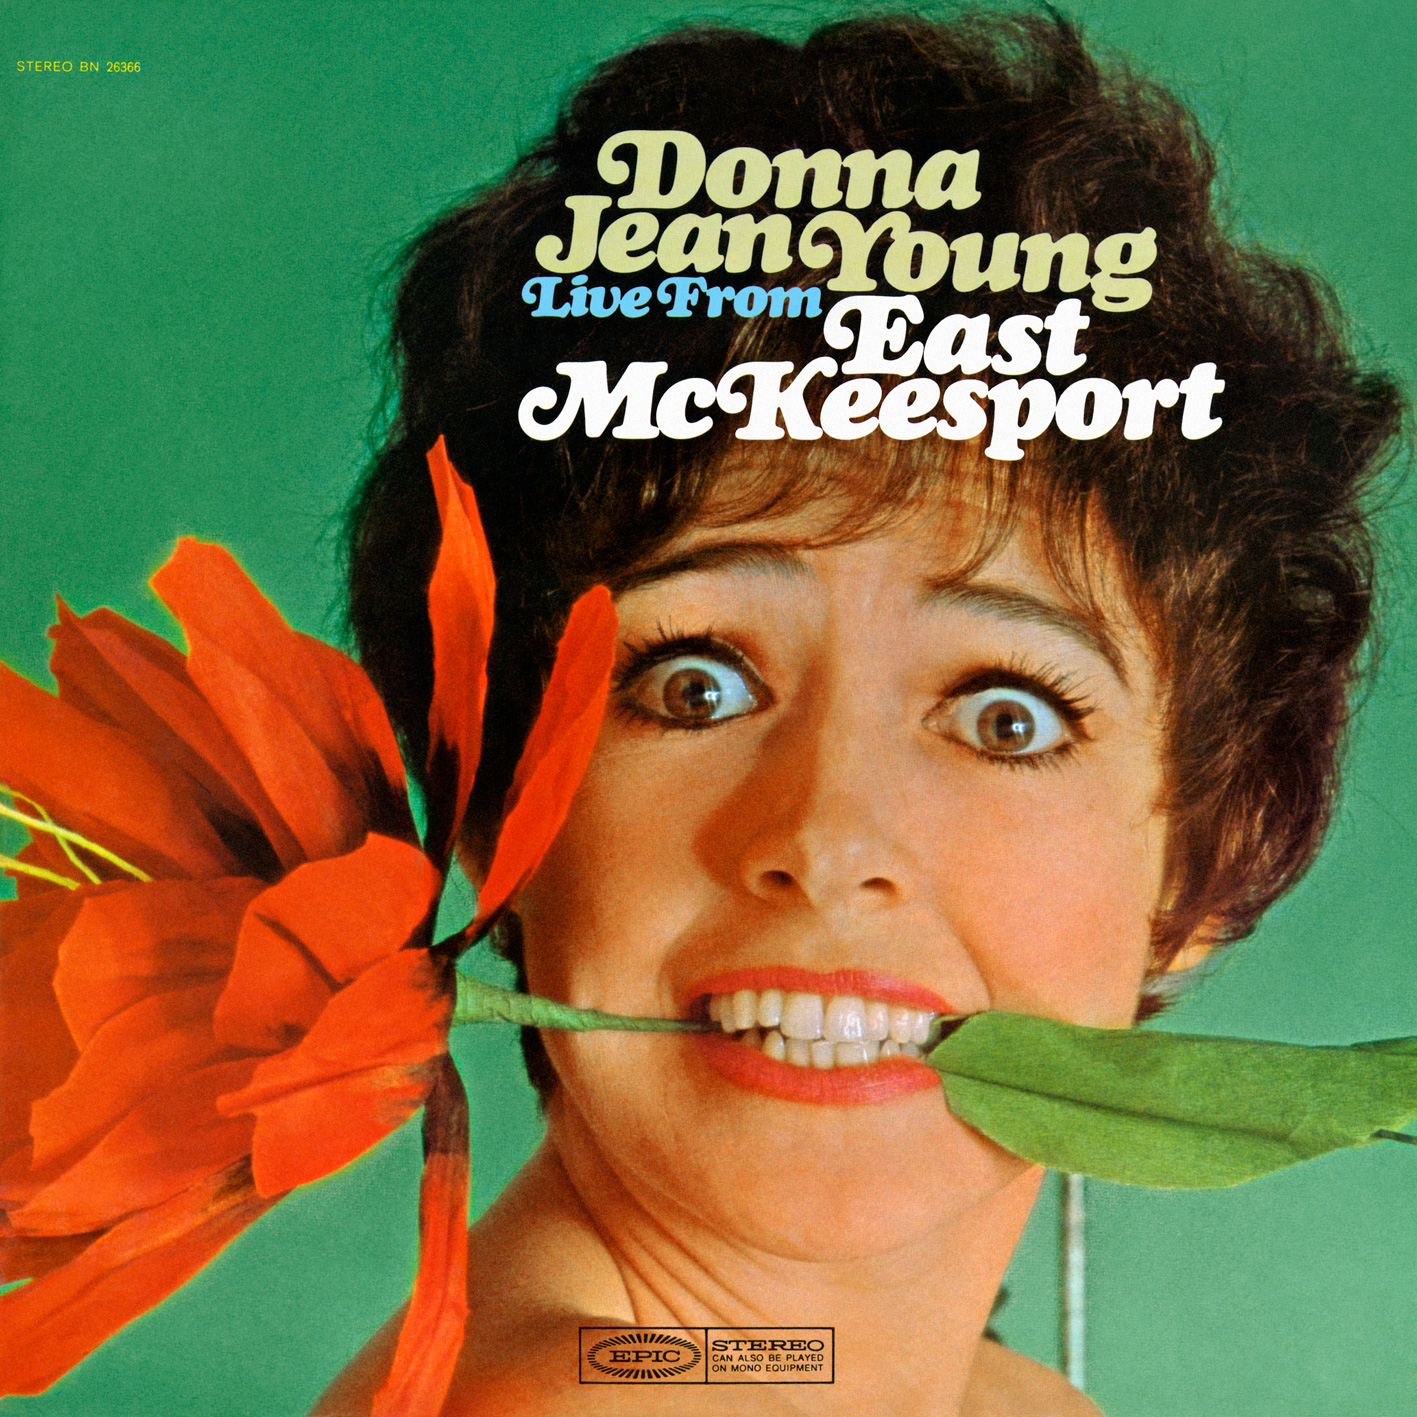 Donna Jean Young – Live From East McKeesport (1968/2018) [HDTracks 24bit/192kHz]